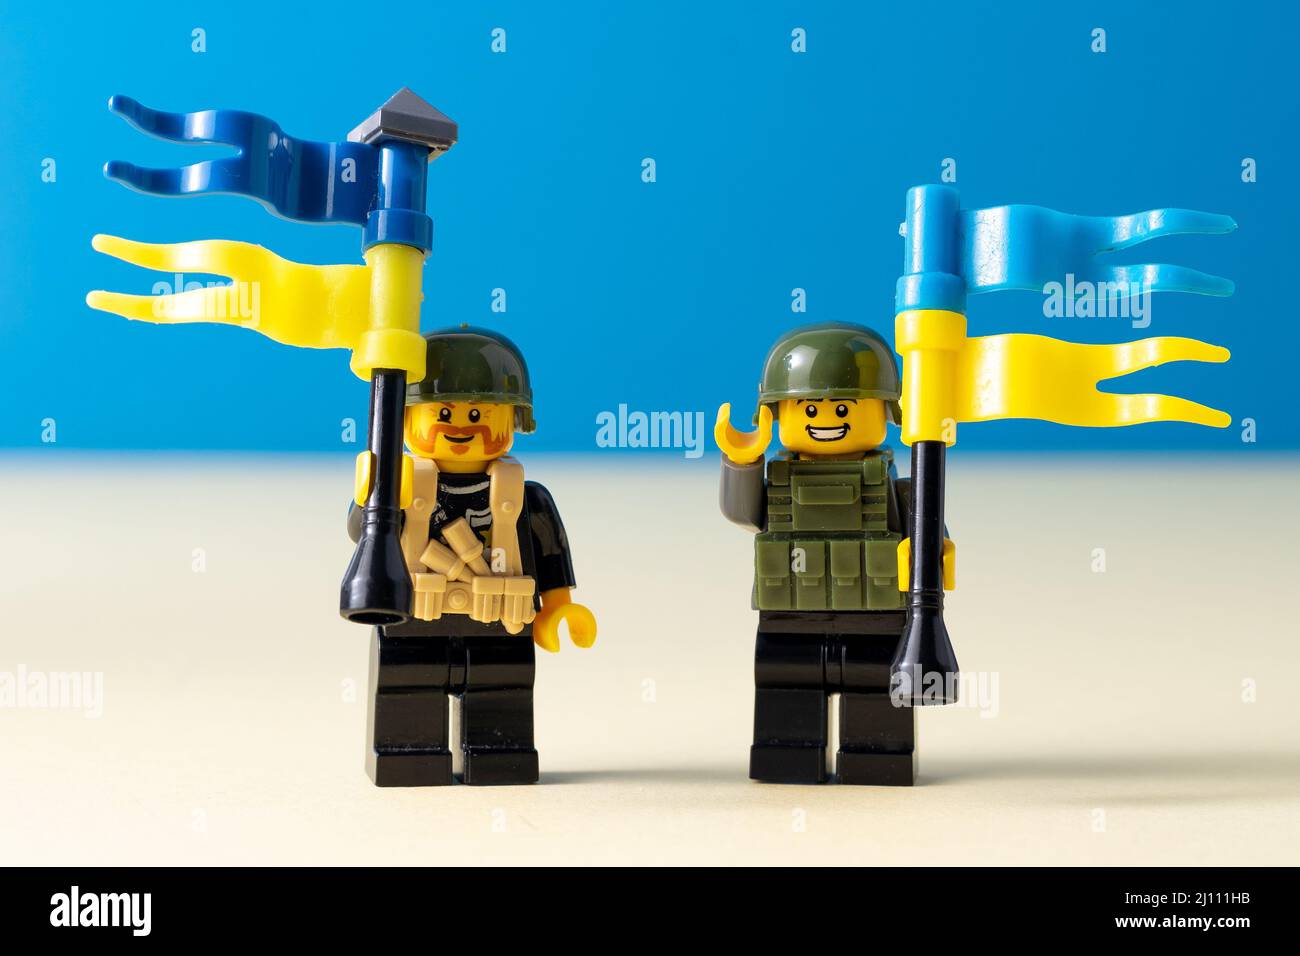 Lego little men with flags of Ukraine. A minifigure toy man holding a blue flag. Soldiers mini figure. Support of the Ukrainian people. Ukraine, Kyiv - March 20, 2022. Stock Photo